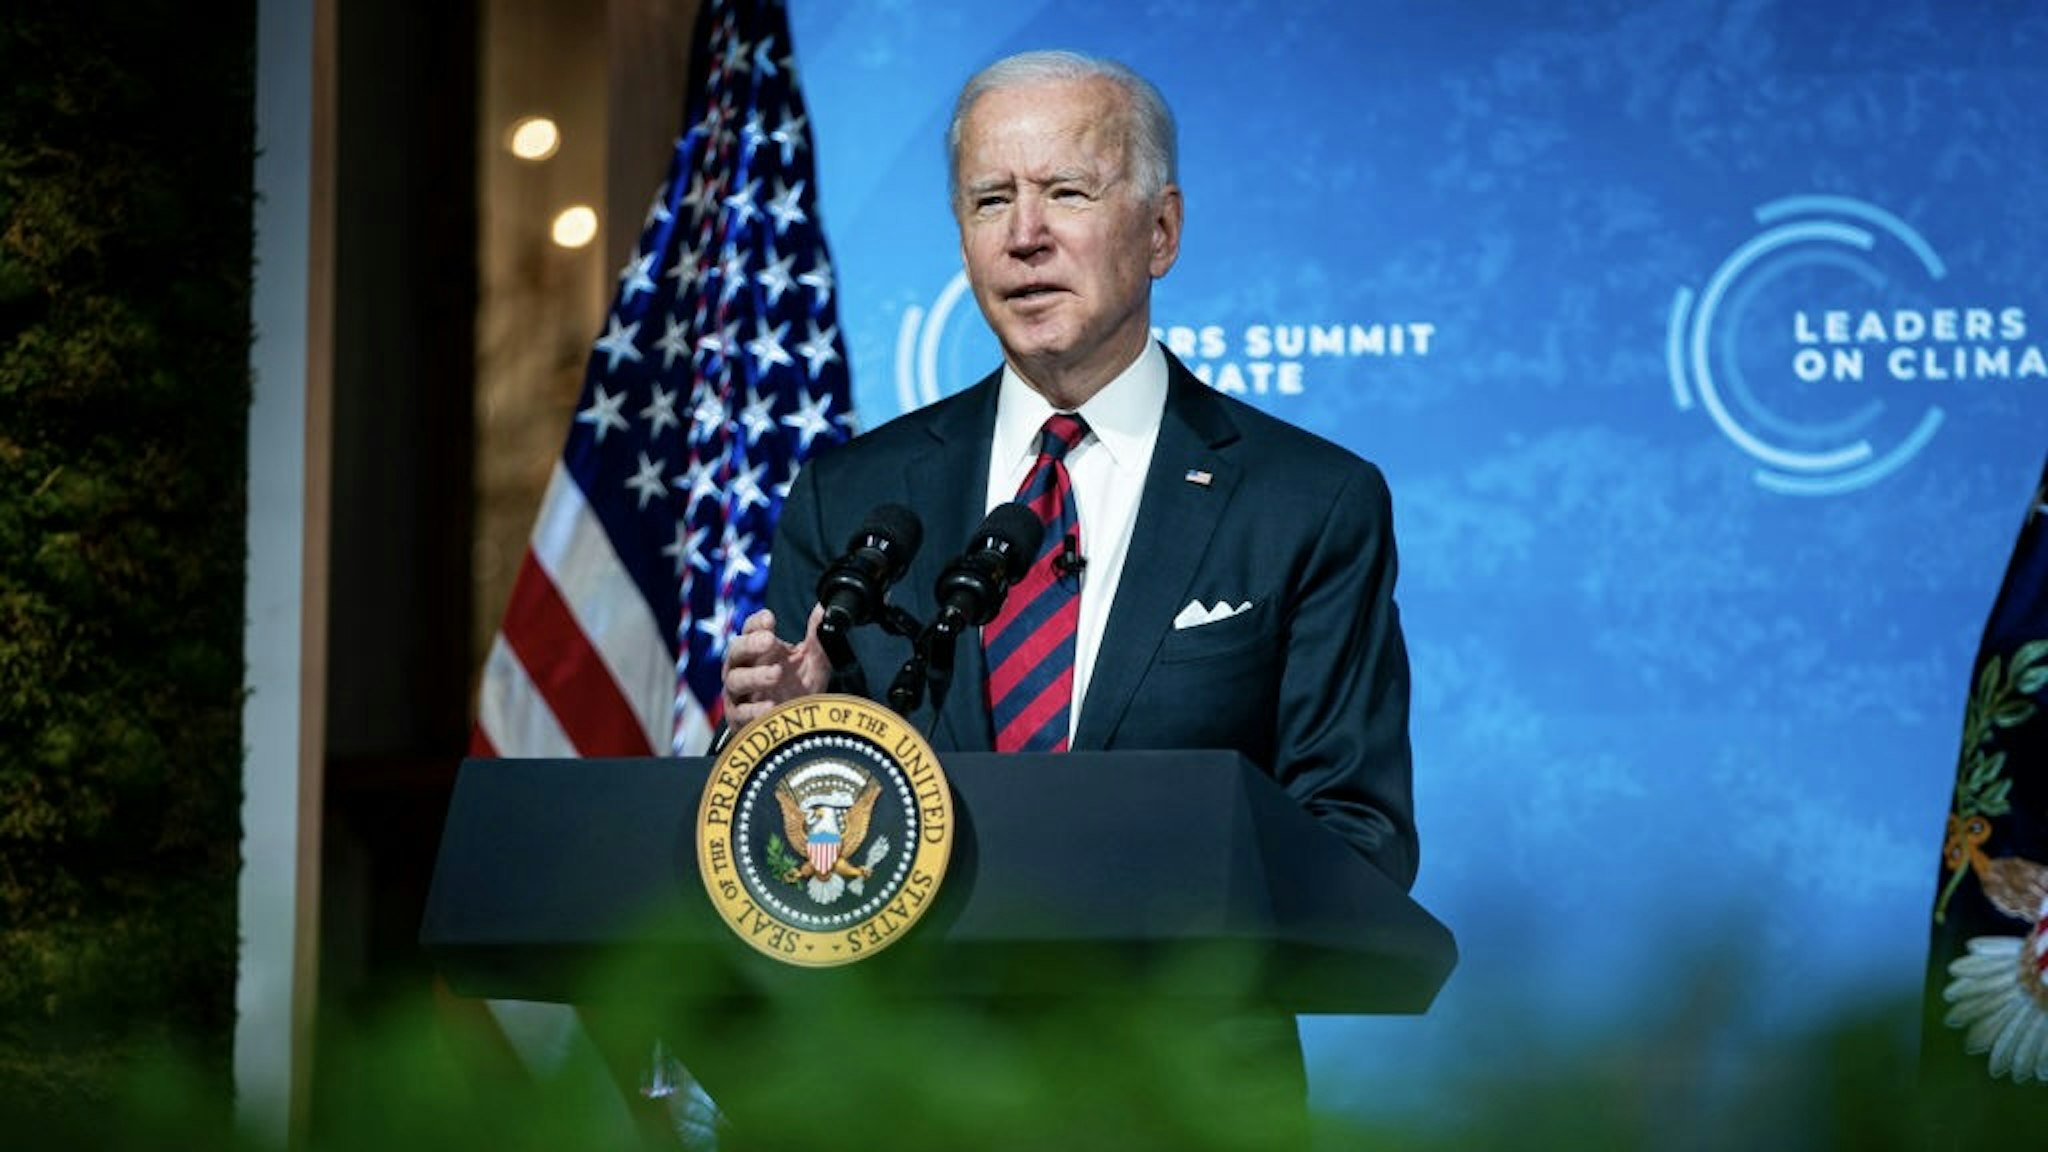 President Biden And Vice President Harris Participate In Virtual Leaders Summit On Climate WASHINGTON, DC - APRIL 22: U.S. President Joe Biden delivers remarks during a virtual Leaders Summit on Climate with 40 world leaders at the East Room of the White House April 22, 2021 in Washington, DC. President Biden pledged to cut greenhouse gas emissions by half by 2030. (Photo by Al Drago-Pool/Getty Images)